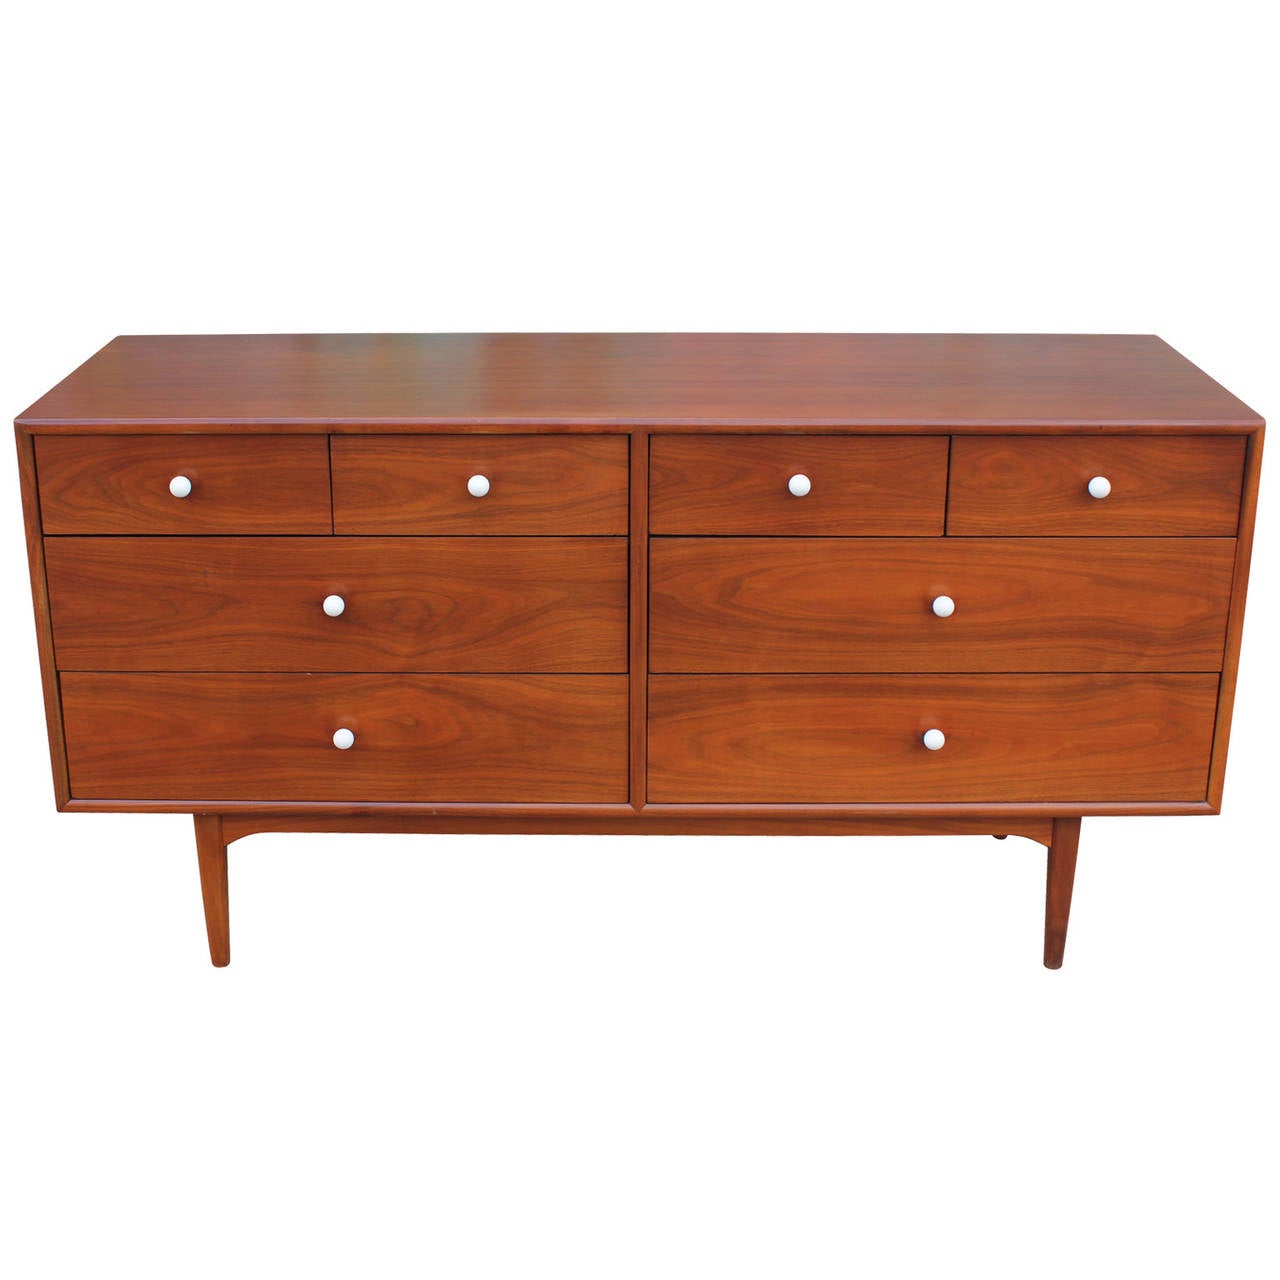 Beautiful Kipp Stewart for Drexel figured walnut 8 drawer dresser with white porcelain knobs. The dresser was made in 1961 and is the Declaration line. It is in excellent restored condition.